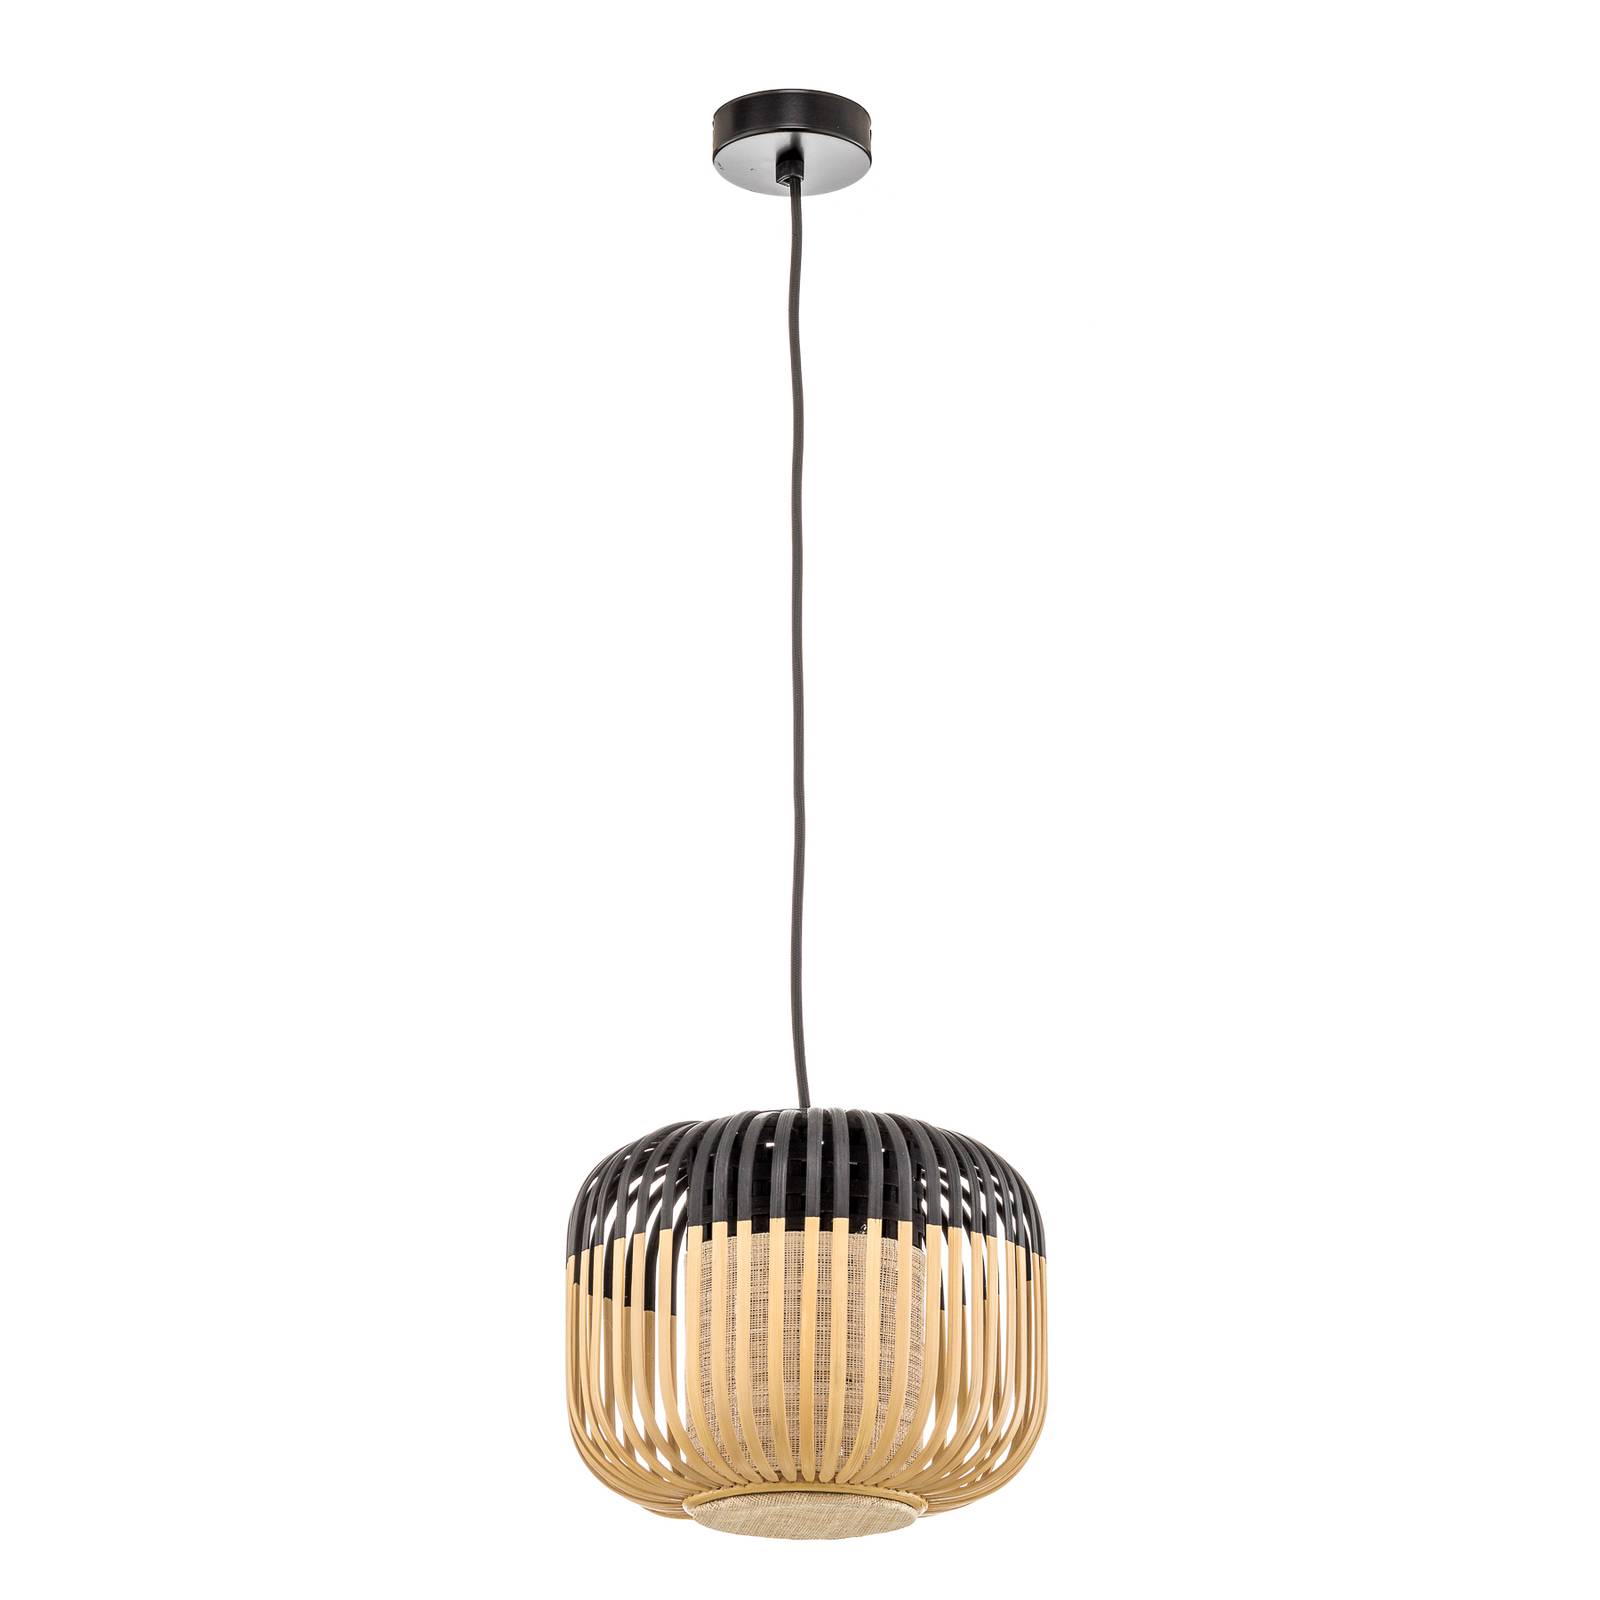 Image of Forestier Bamboo Light XS suspension 27 cm noire 3700663909807